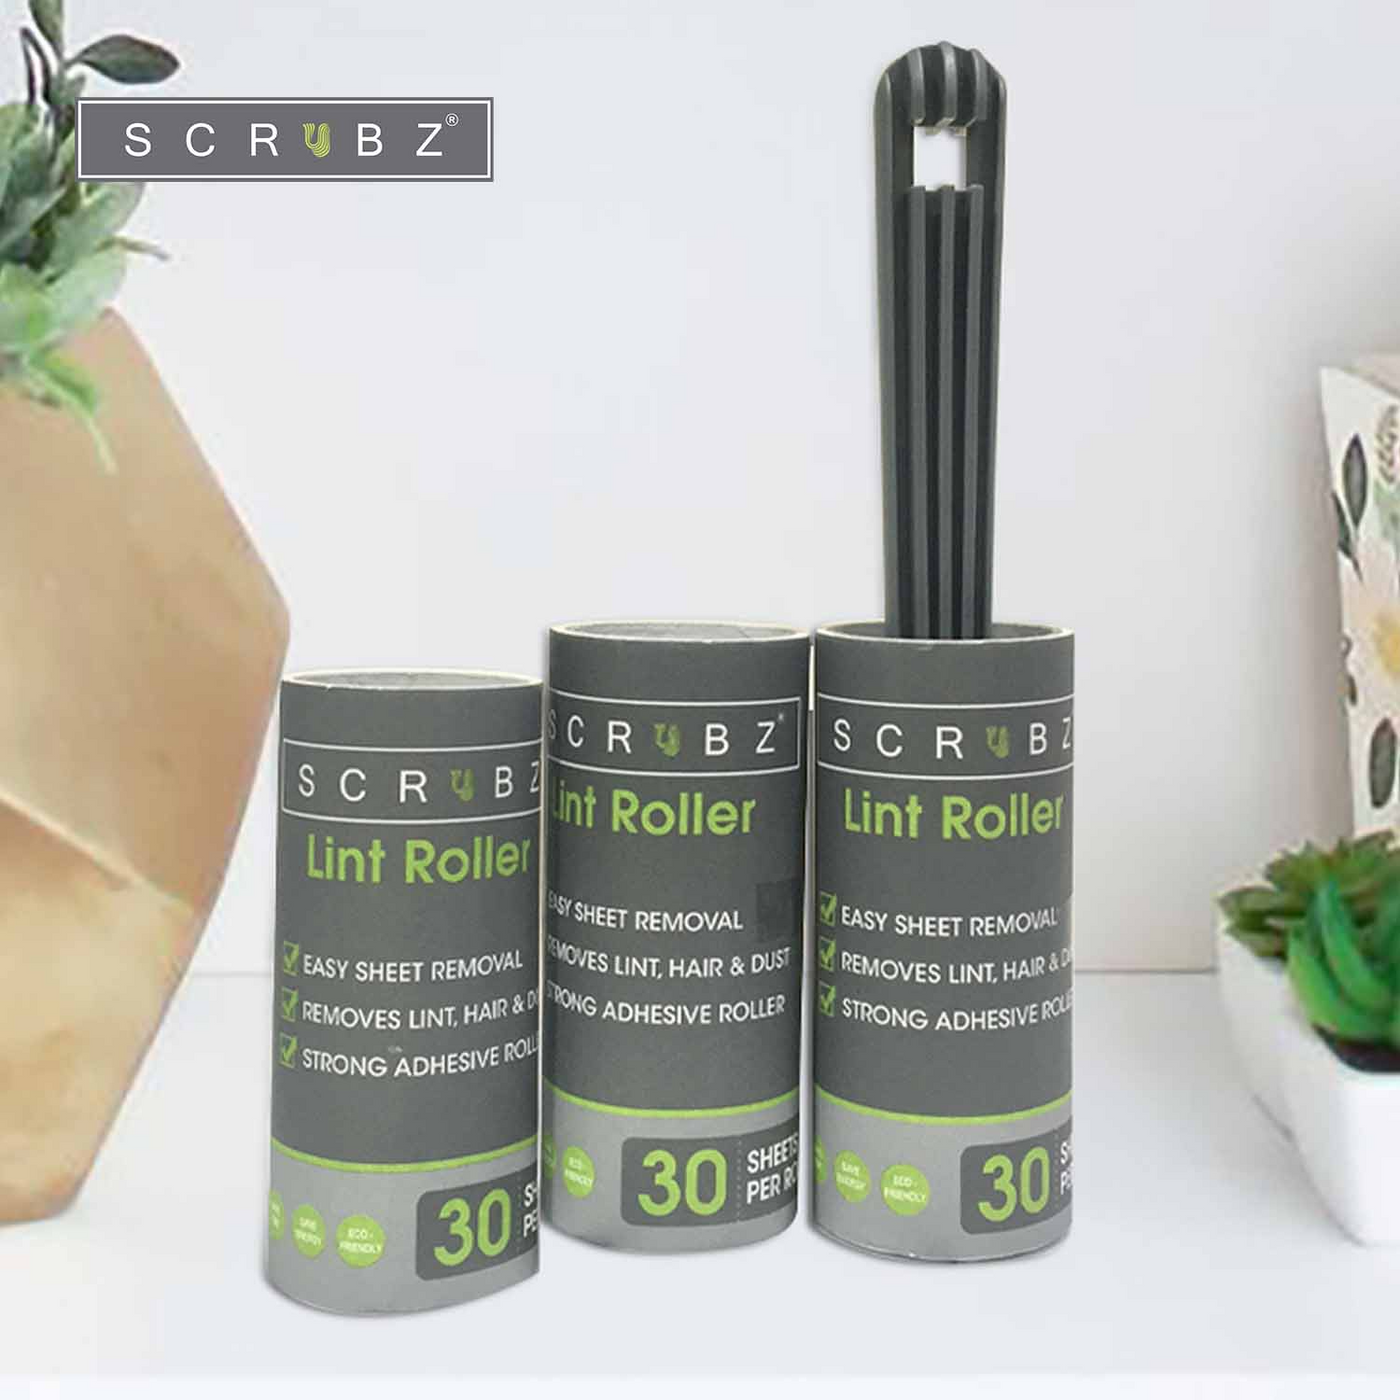 SCRUBZ Heavy Duty Cleaning Essentials Premium Lint Roller Set of 3 Amazing Gift Idea For Any Occasion!